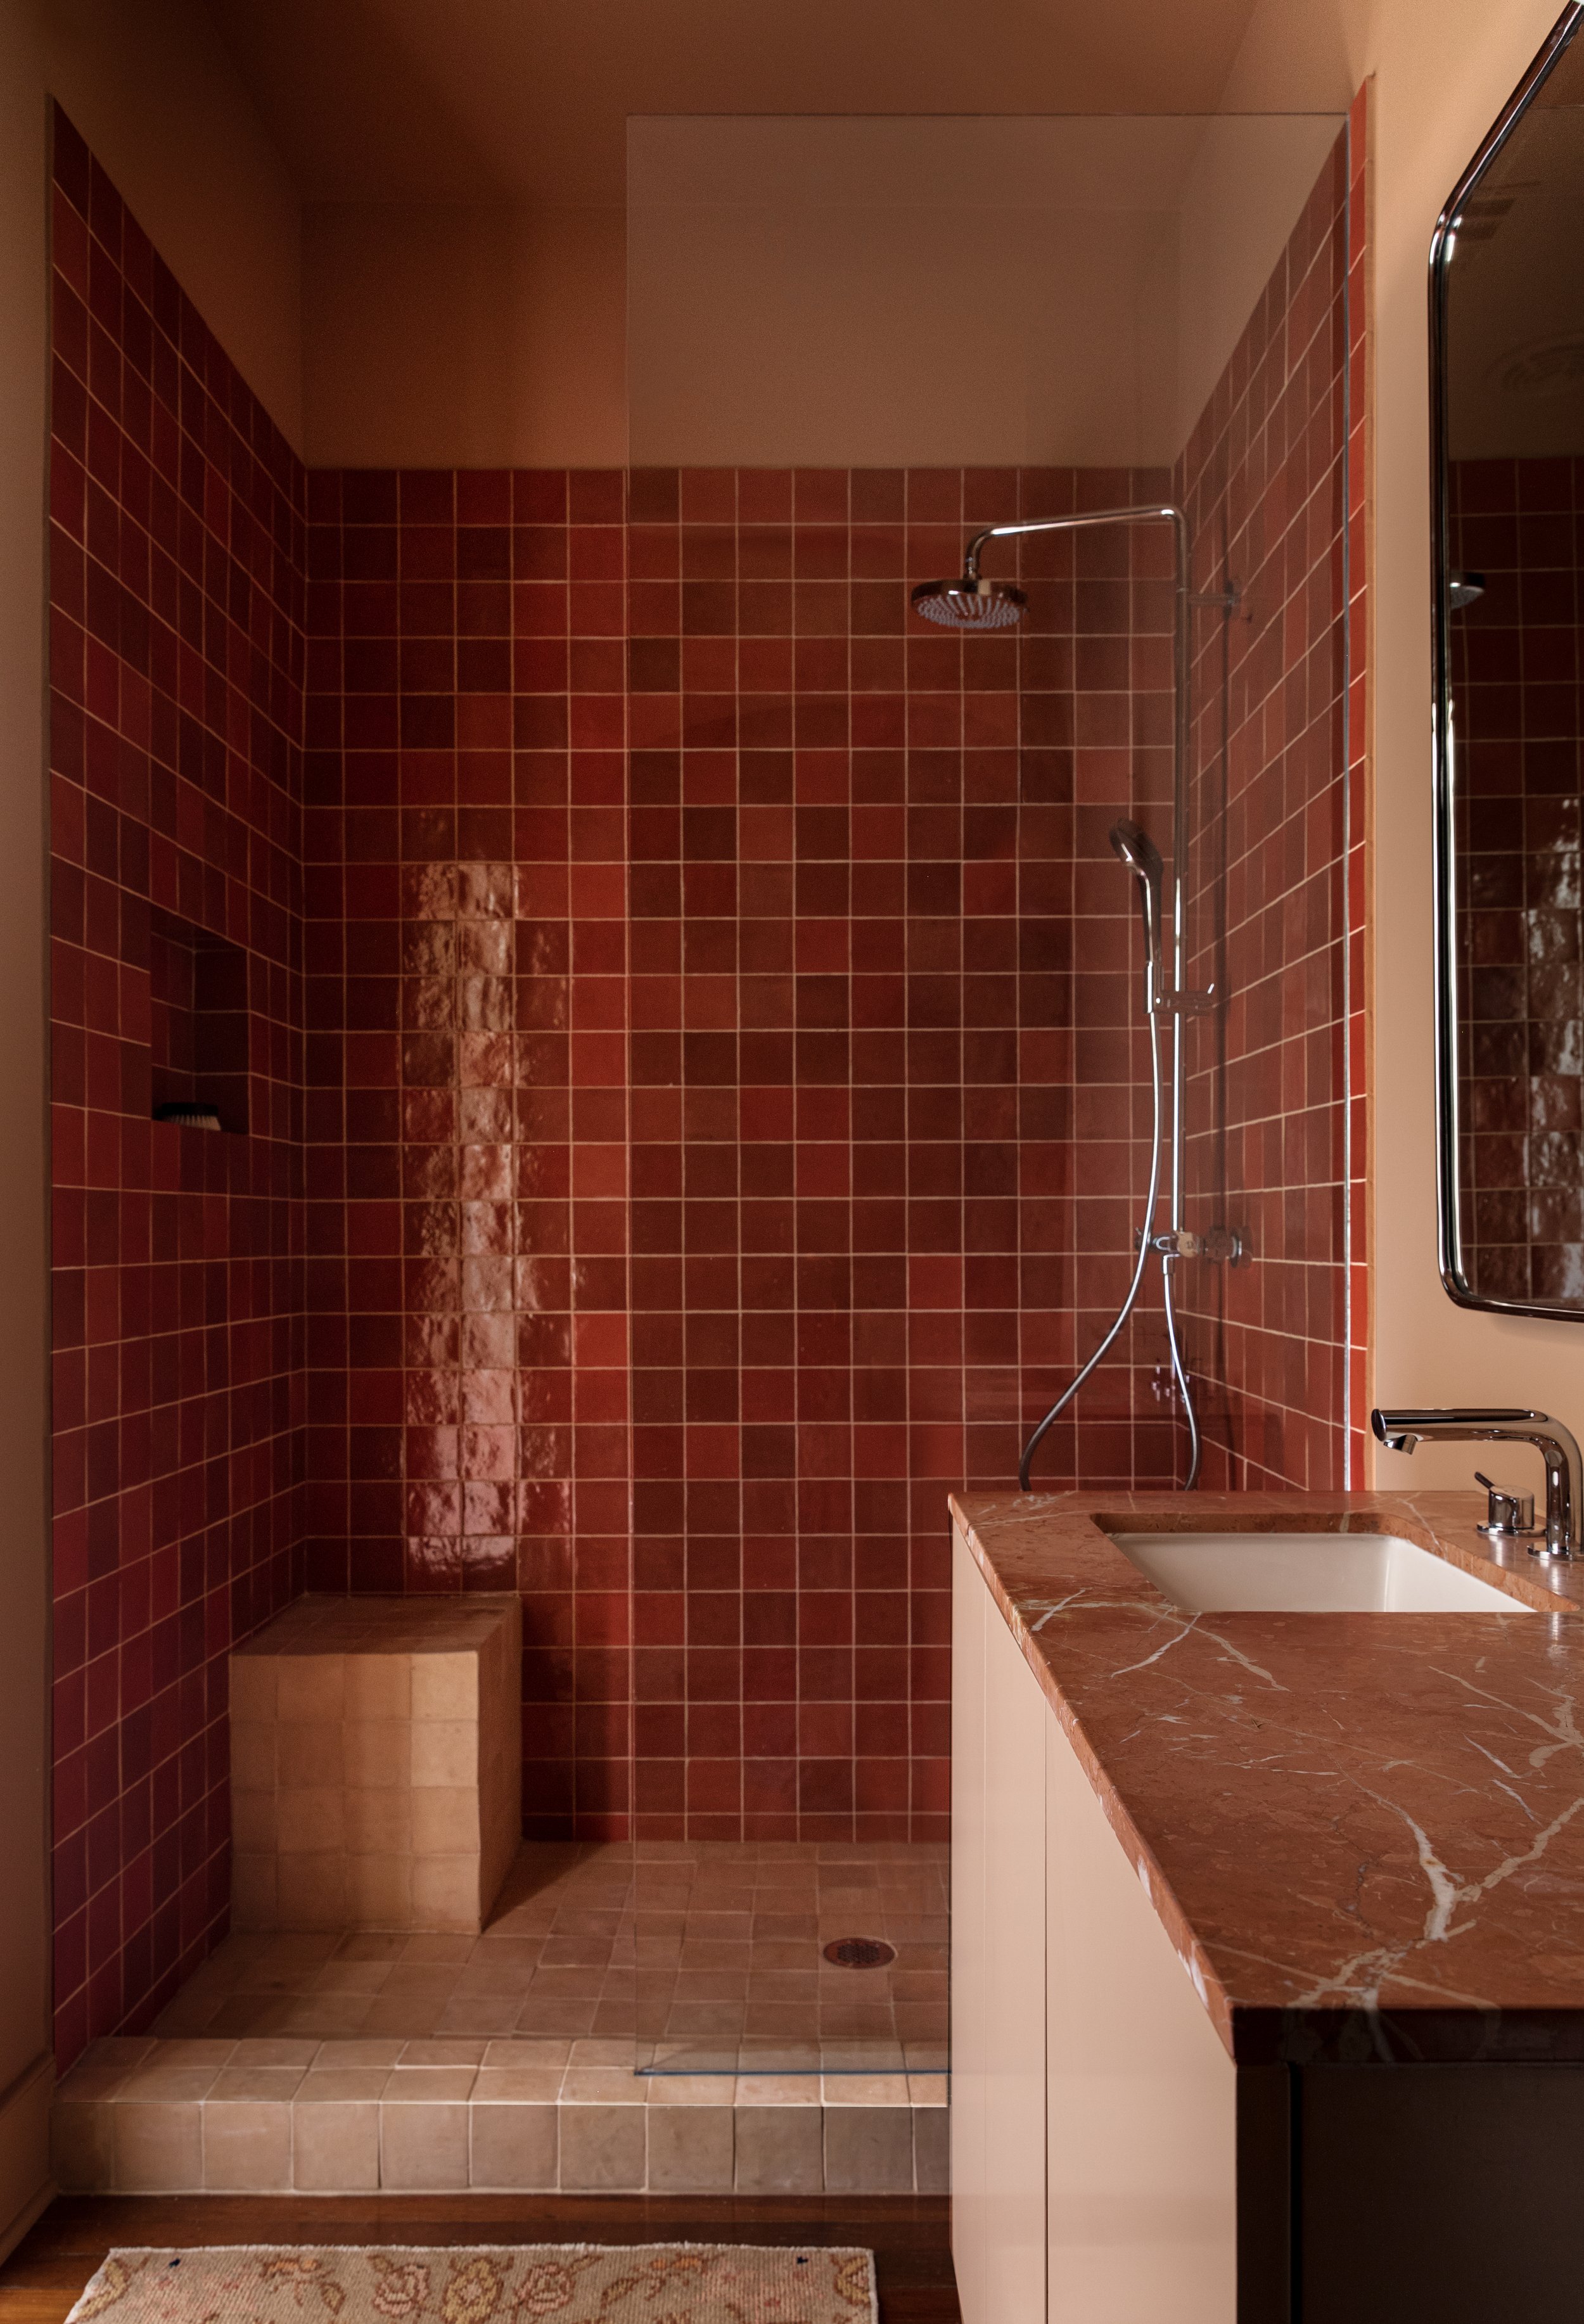  an orange and terracotta zellige tile contemporary modern and rustic eclectic bathroom interior design in houston texas 